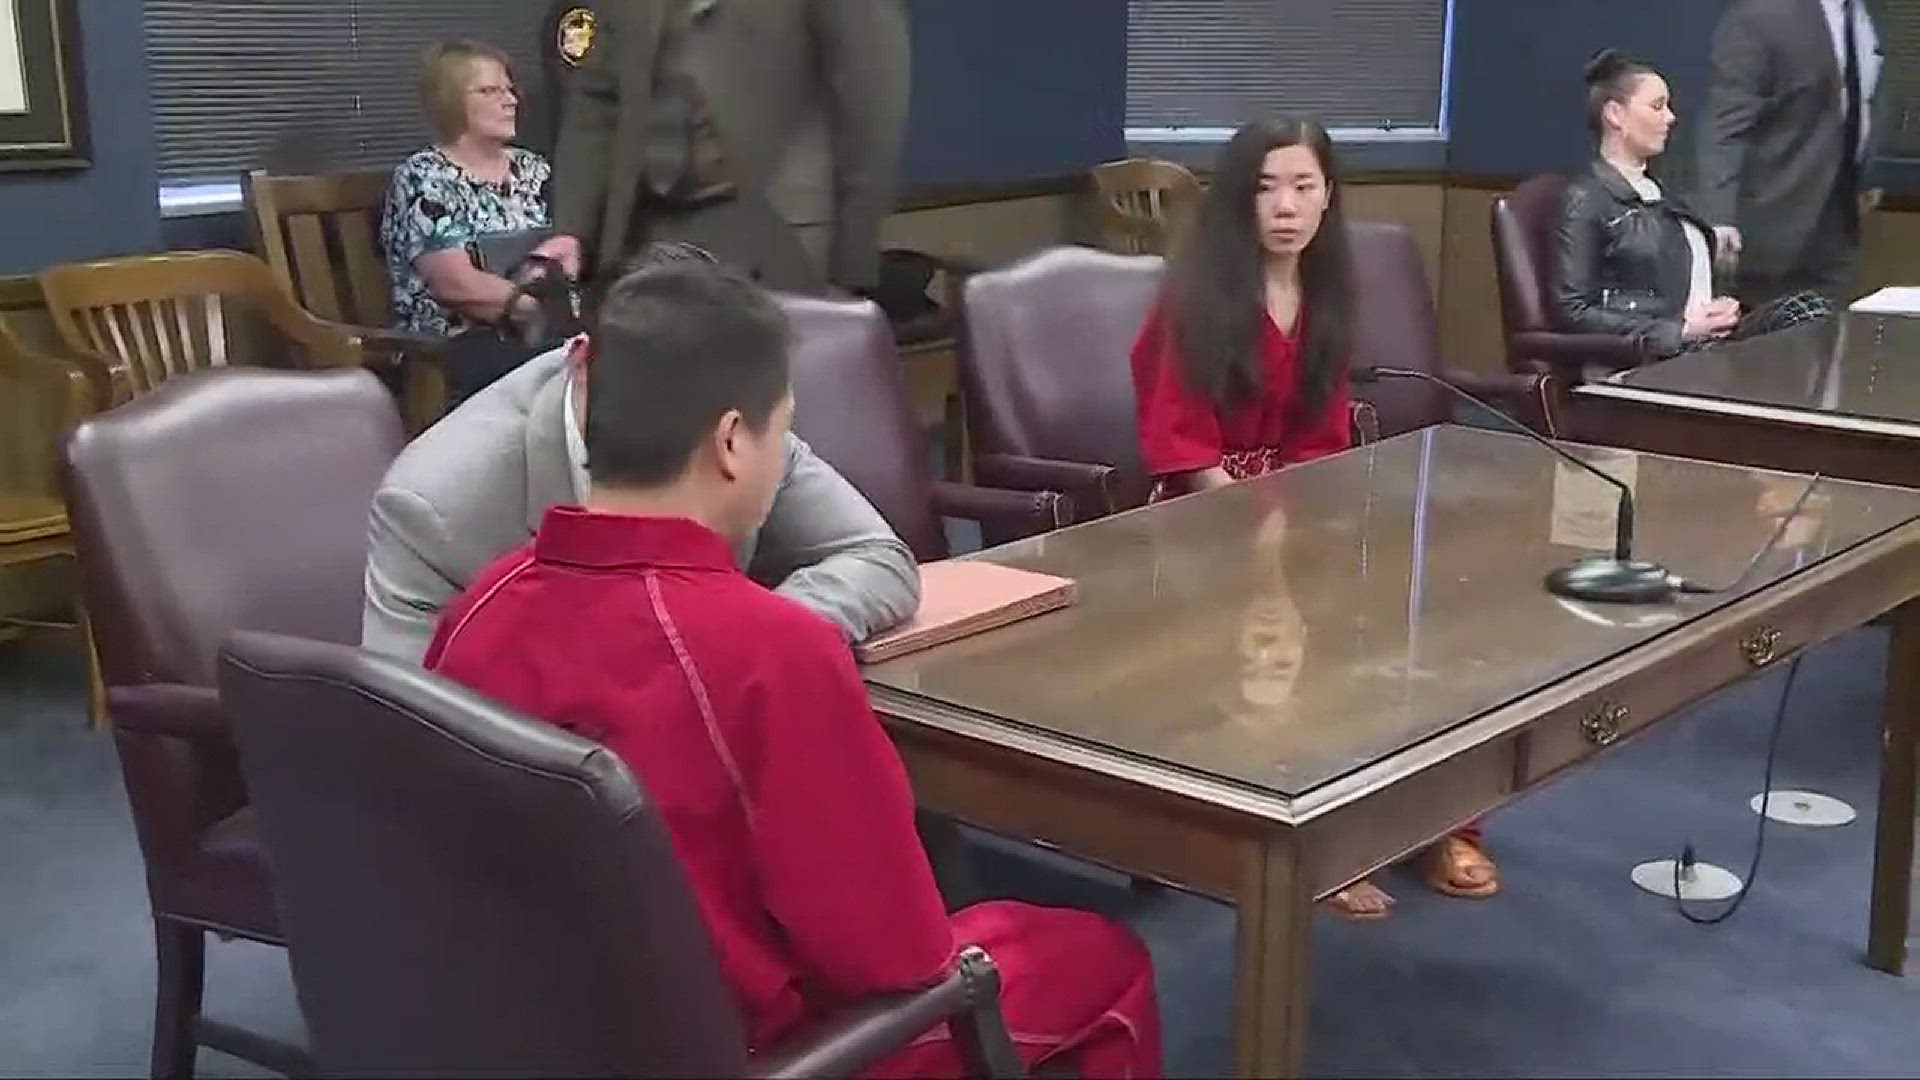 Mingming Chen pleads insanity after daughter killed in Chinese restaurant